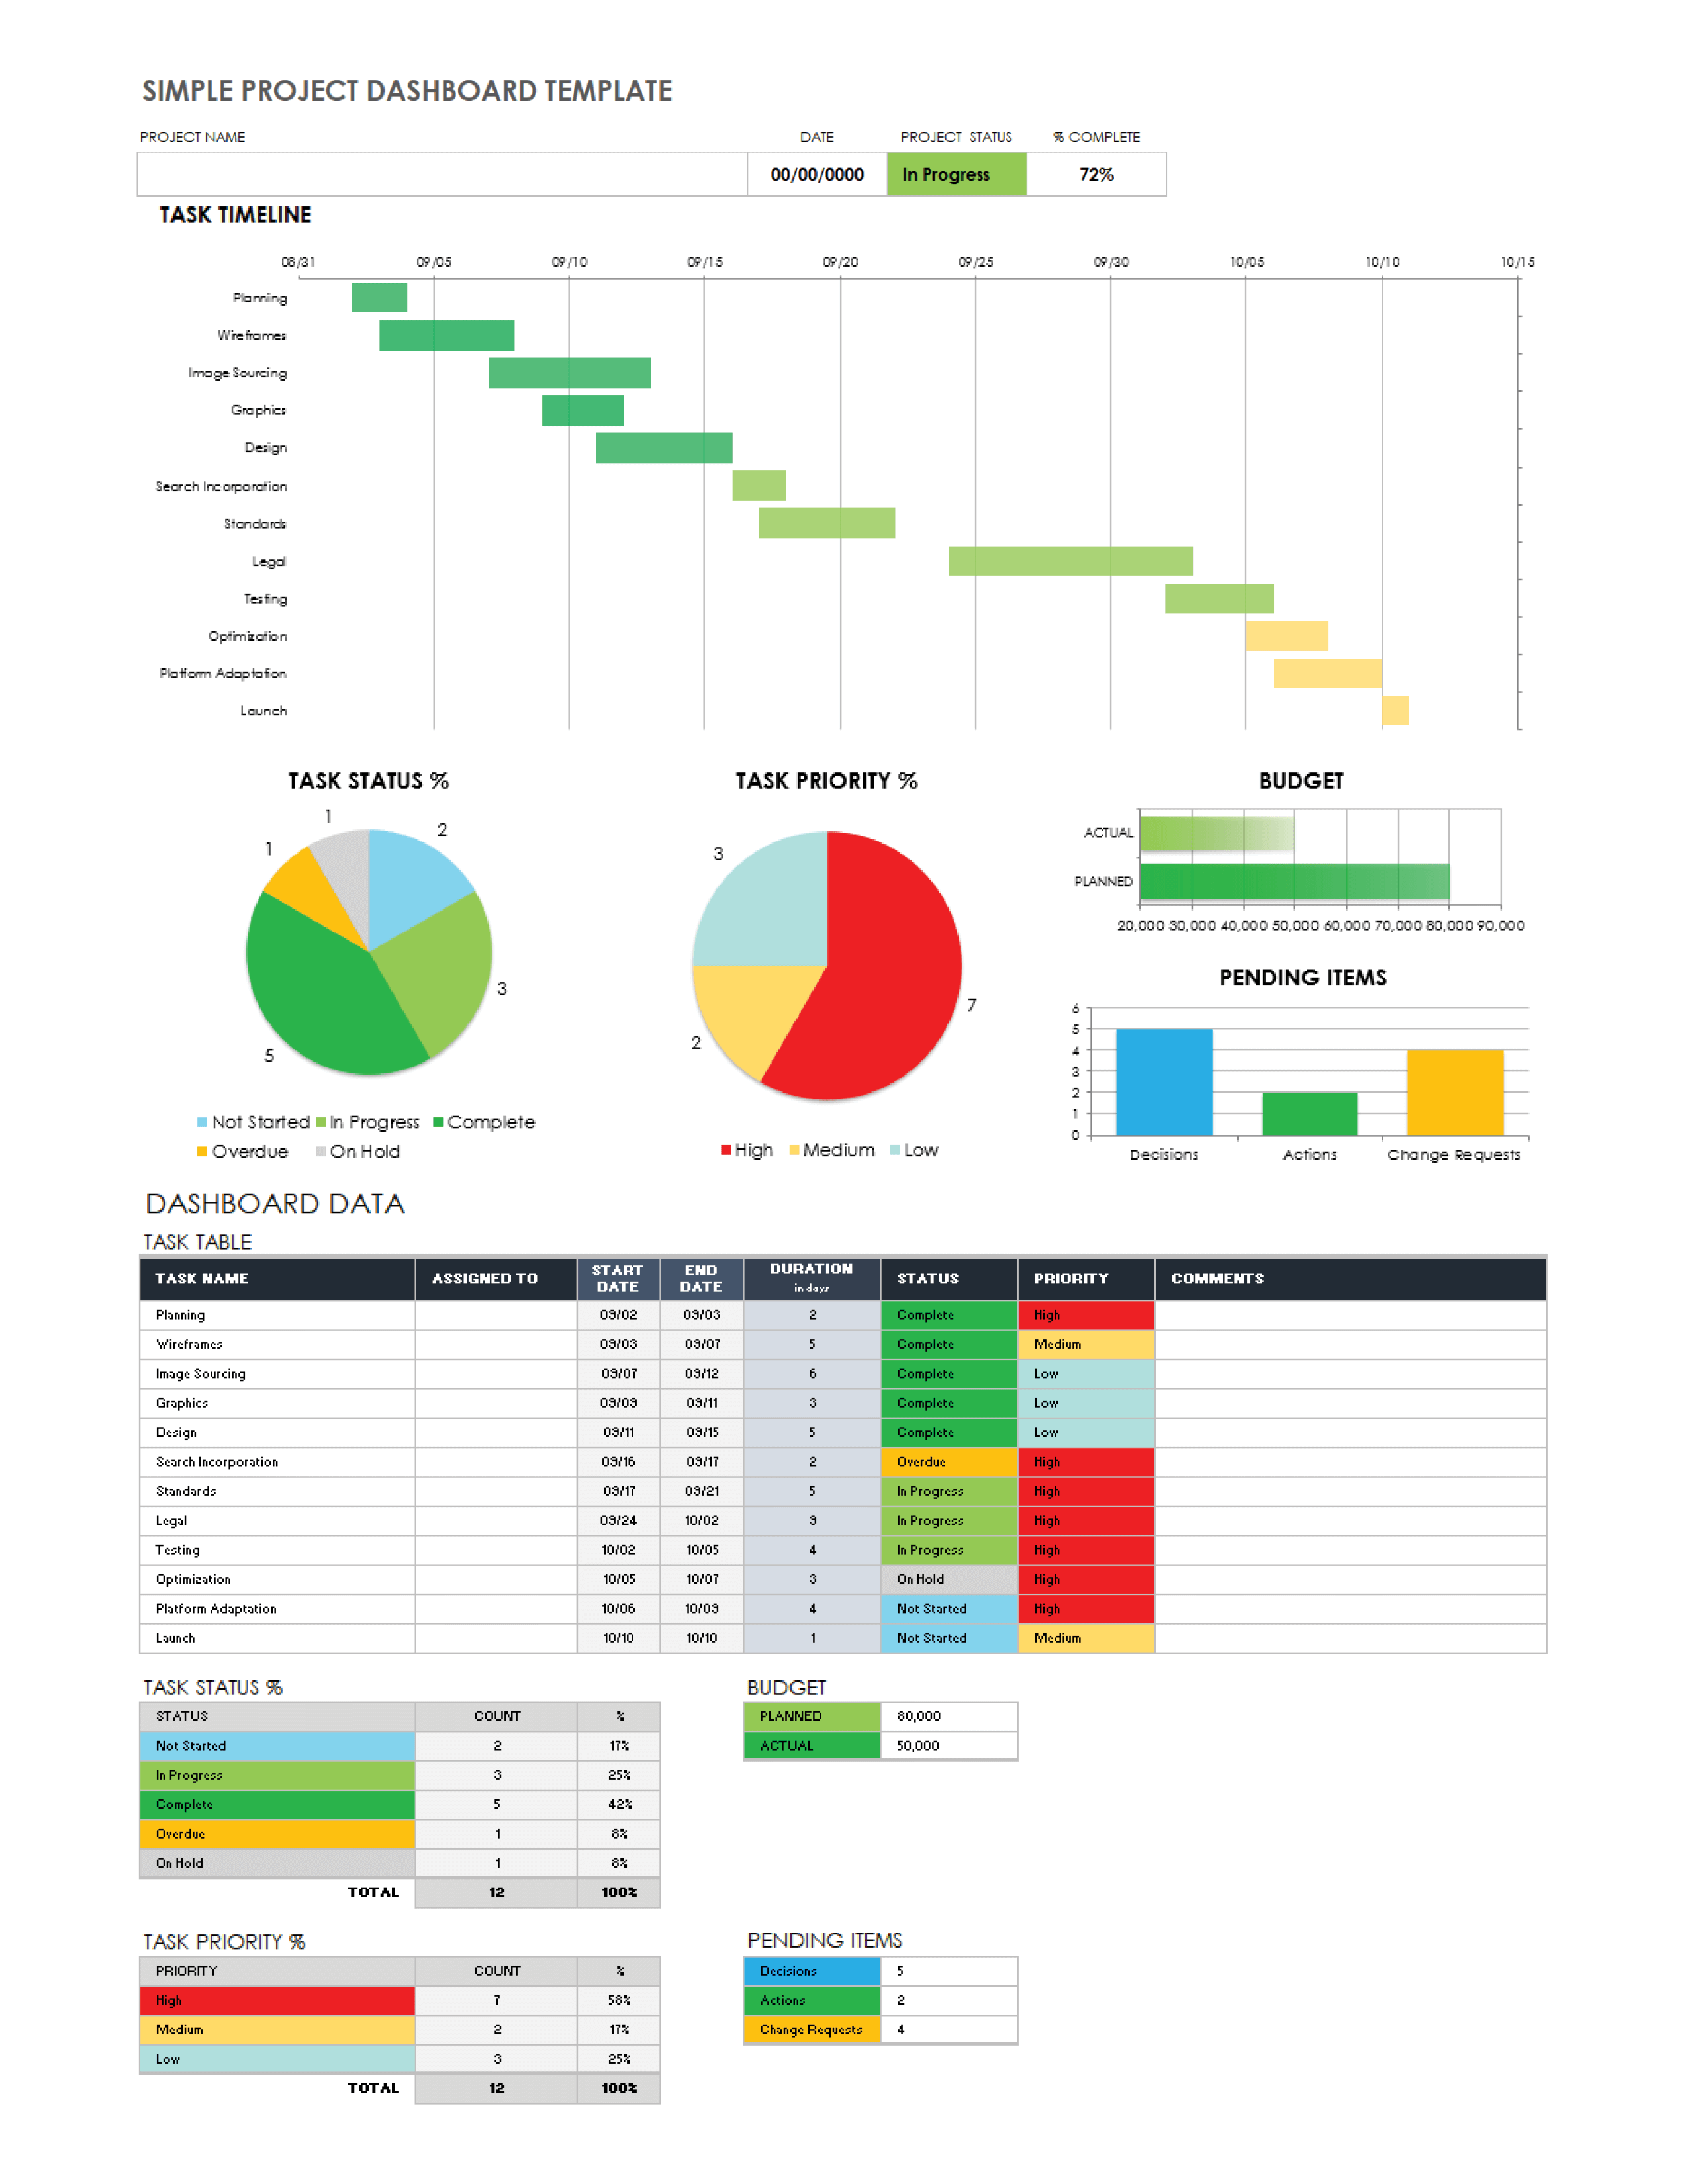 Simple Project Dashboard Template